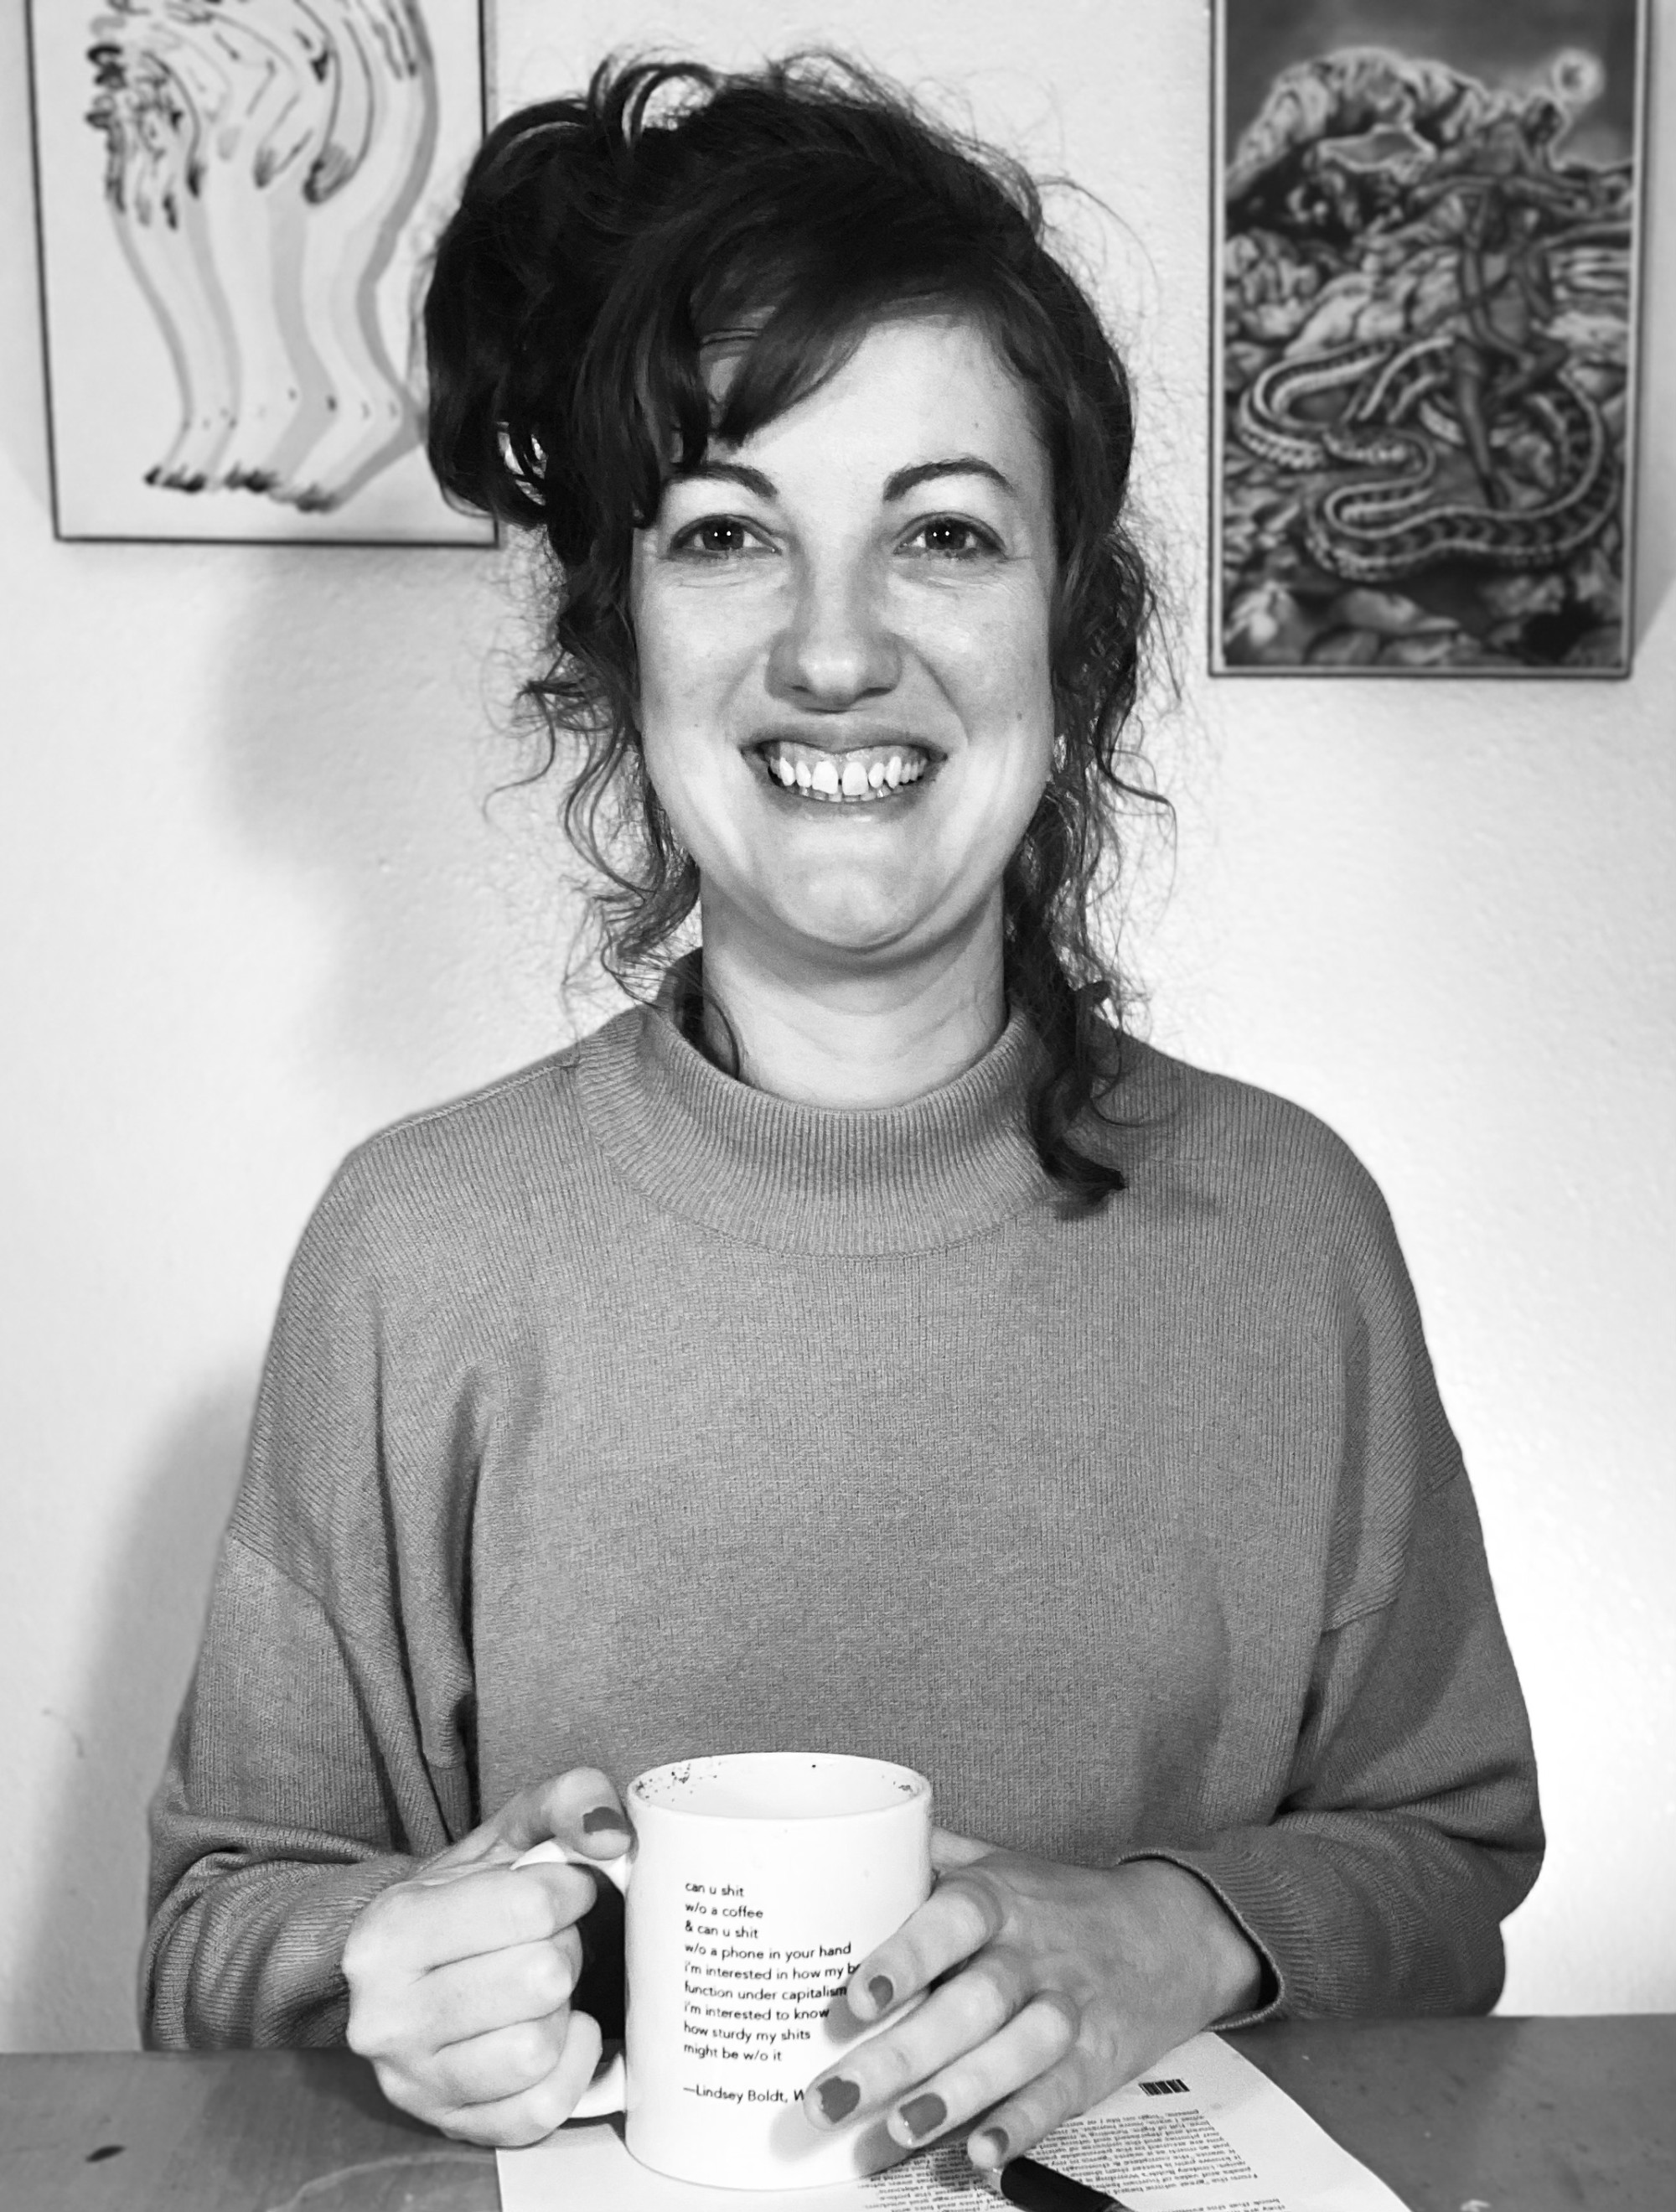 In this black and white photo, Lindsey Boldt sits at her kitchen table, wearing a turtleneck sweater and holding a white mug with a poem from her book Weirding printed on it. The type is too small to read, but it says: "can u shit / w/o a coffee / & can u shit /w/o a phone in your hand / i'm interested in how my bowels might function under capitalism / i'm interested to know / how sturdy my shits/ might be w/o it". She is smiling.